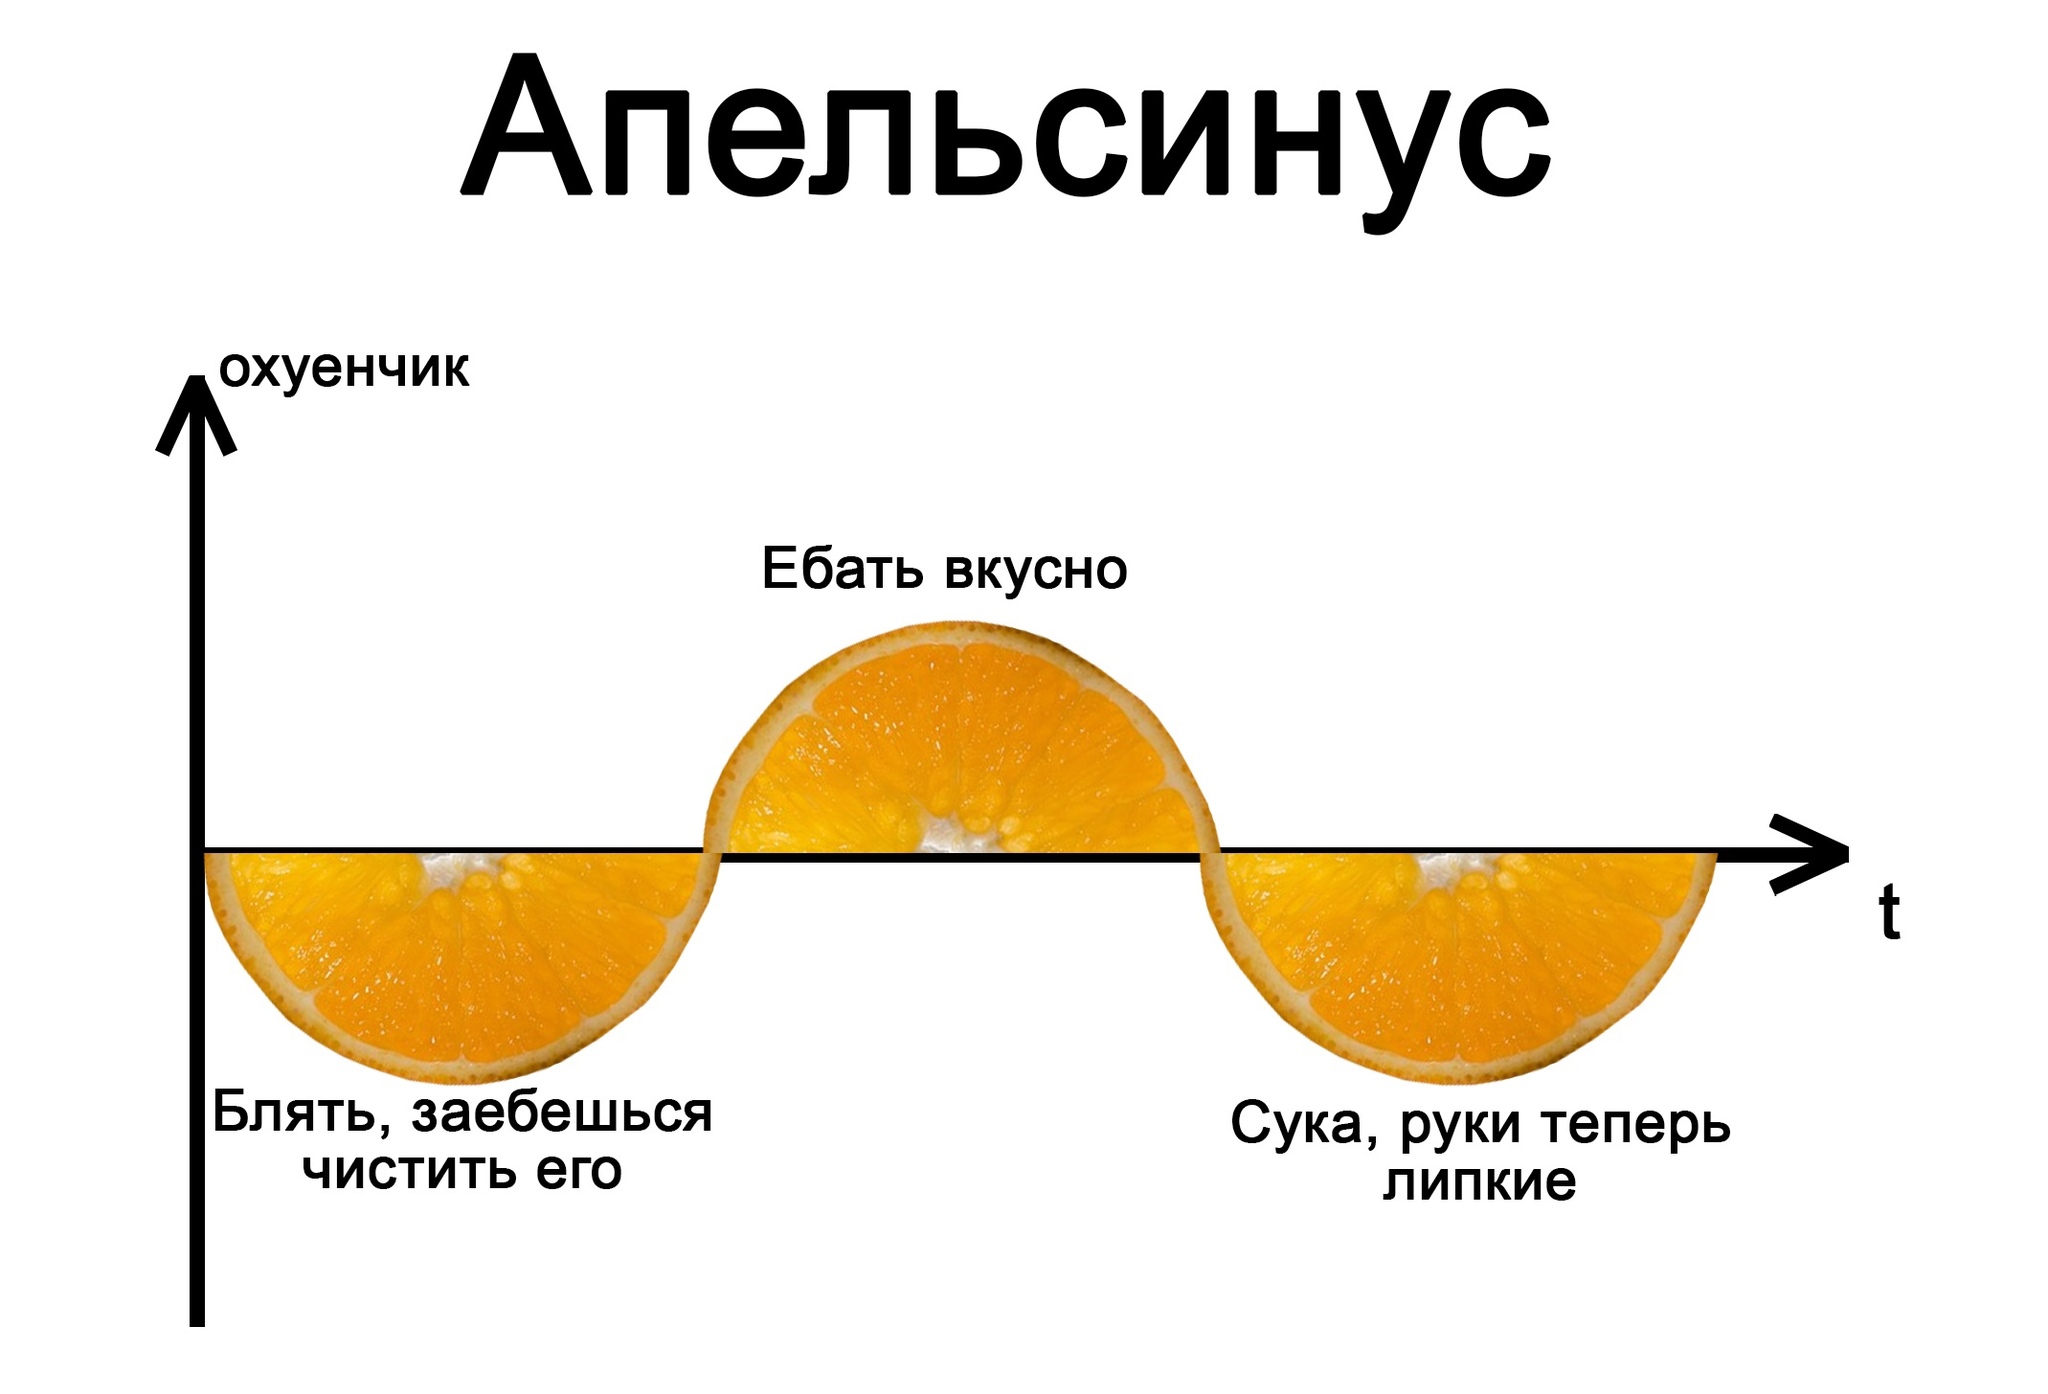 Sine - Orange (Not a boring study) - Schedule, Clearly, Sine, Repeat, Mat, Orange, Picture with text